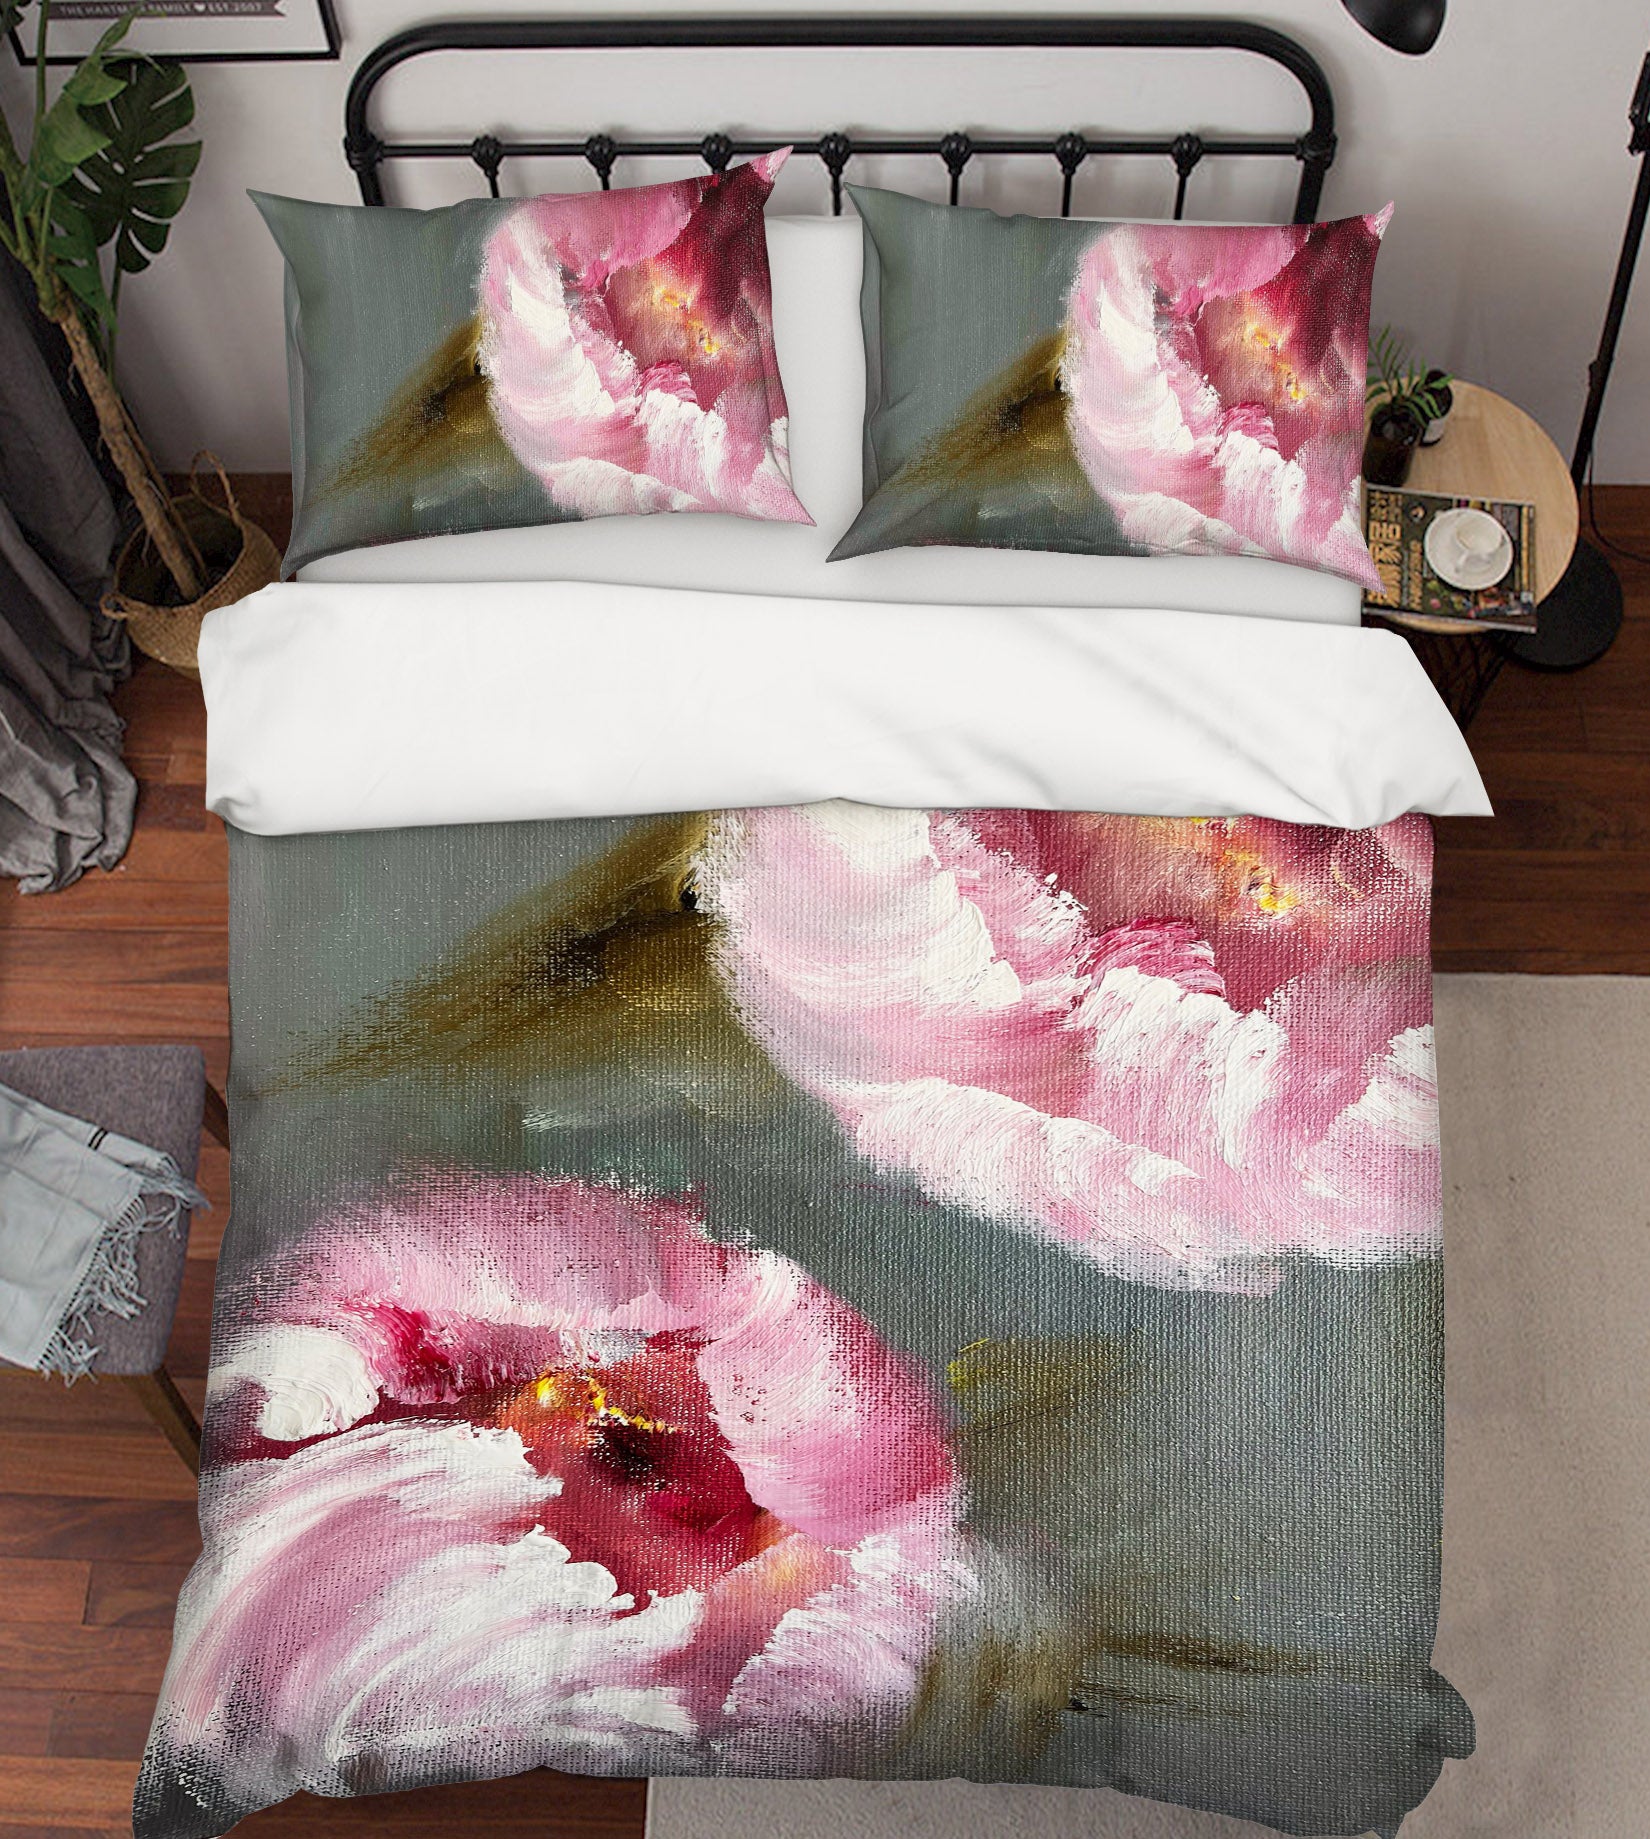 3D Painted Flowers 574 Skromova Marina Bedding Bed Pillowcases Quilt